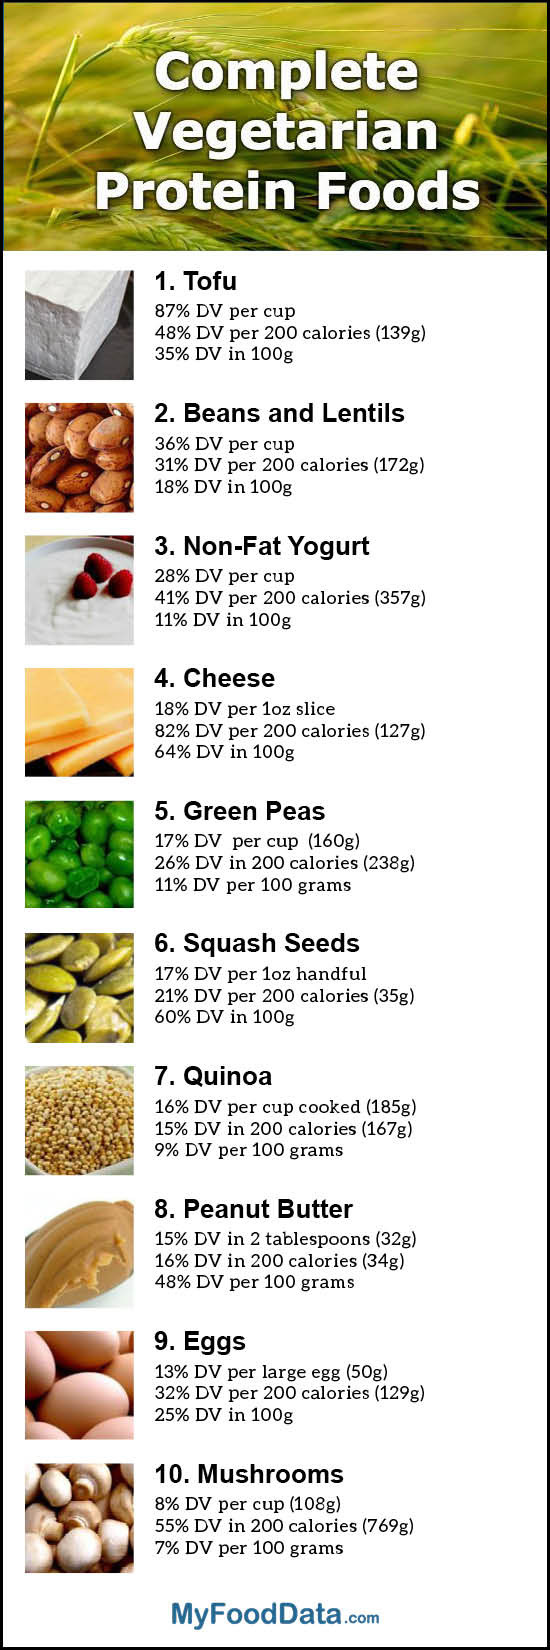 Foods With Protein For Vegetarian
 Top 10 plete Ve arian Protein Foods with All the